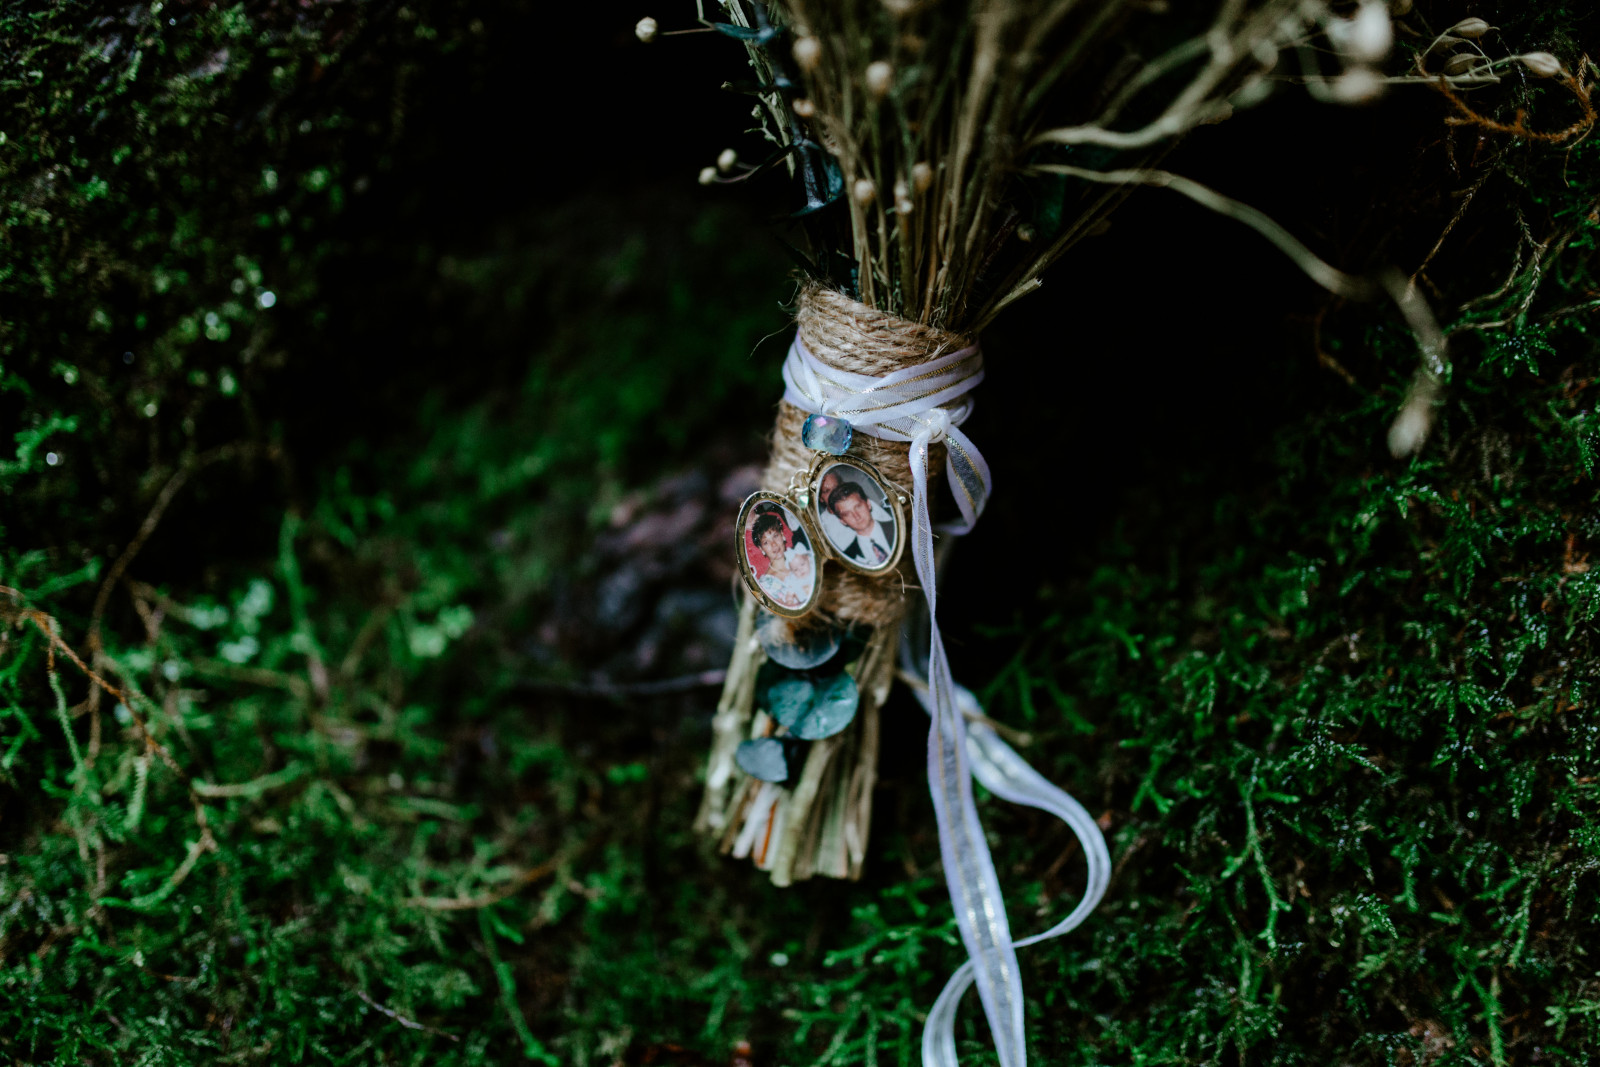 A locket on Mollie's flowers. Elopement photography in the Olympic National Park by Sienna Plus Josh.